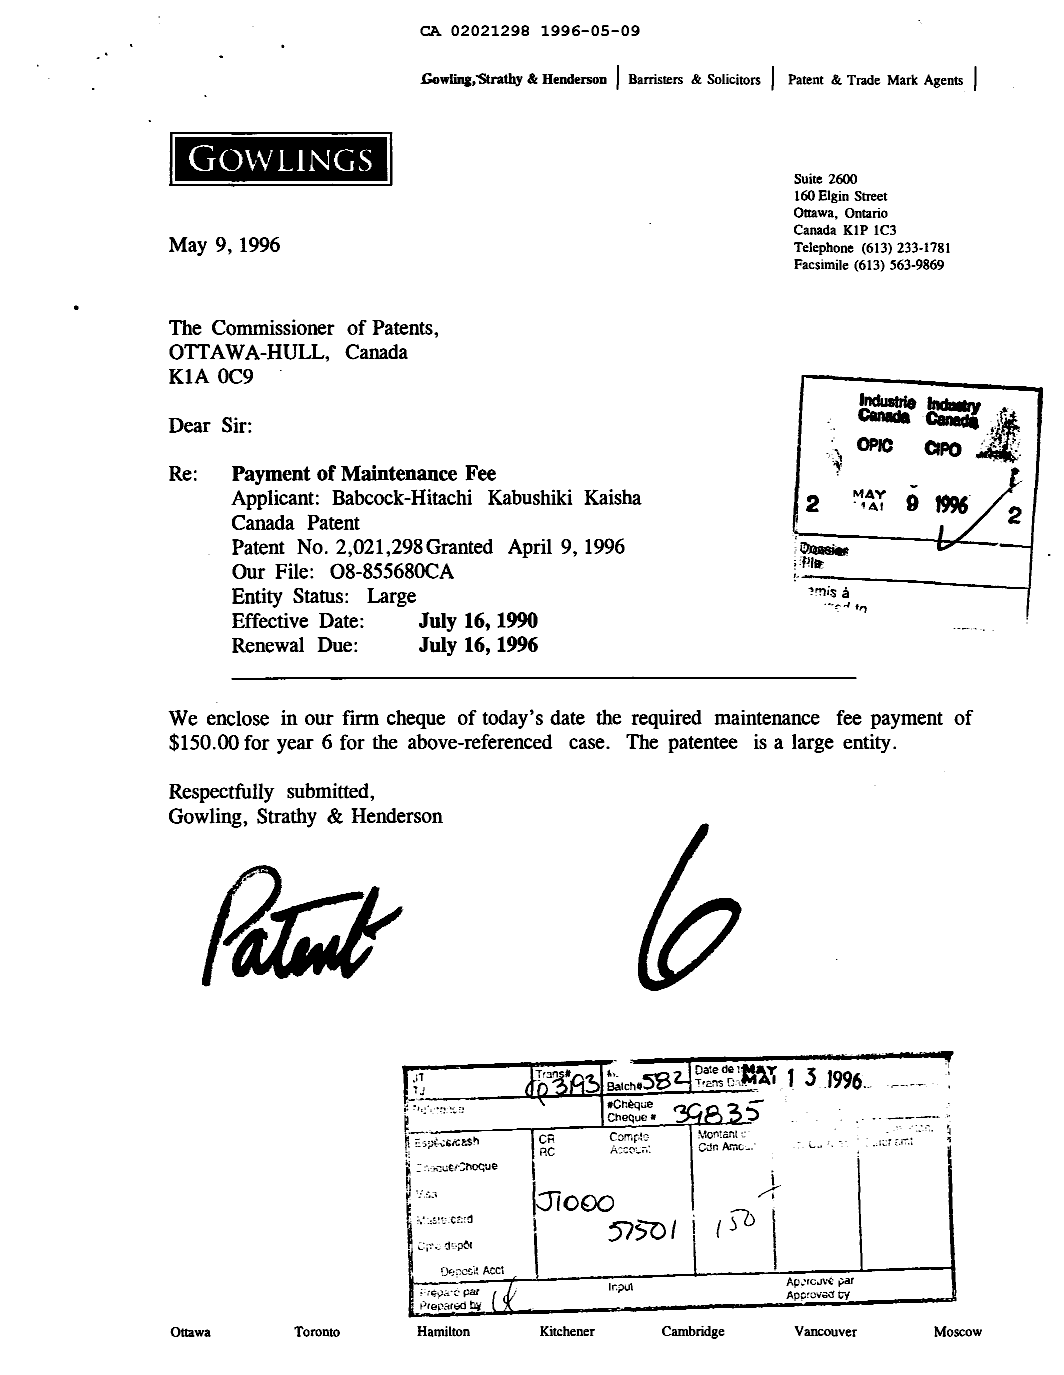 Canadian Patent Document 2021298. Fees 19960509. Image 1 of 1